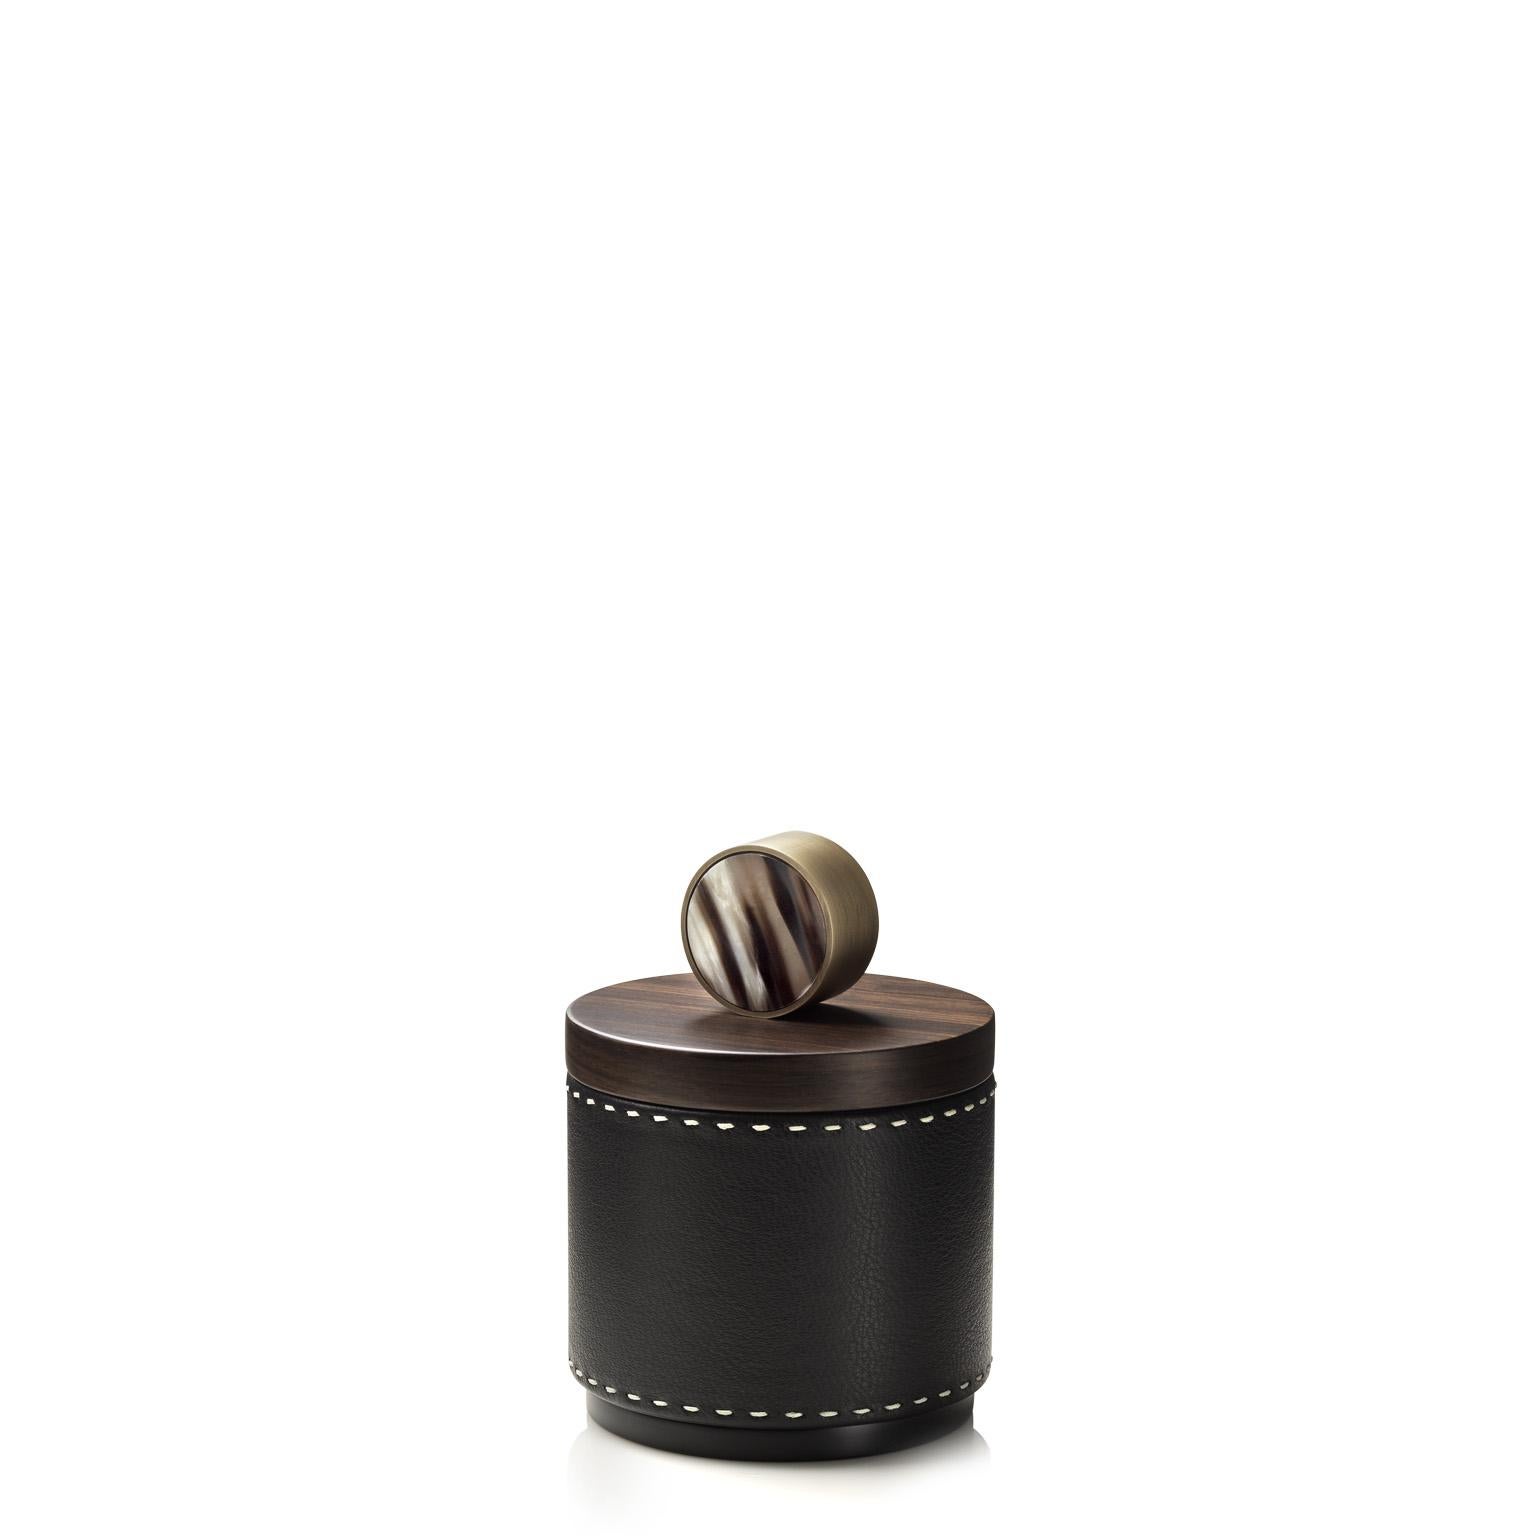 Hand-Crafted Agneta Round Box in Pebbled leather with Handle in Corno Italiano, Mod. 4480 For Sale